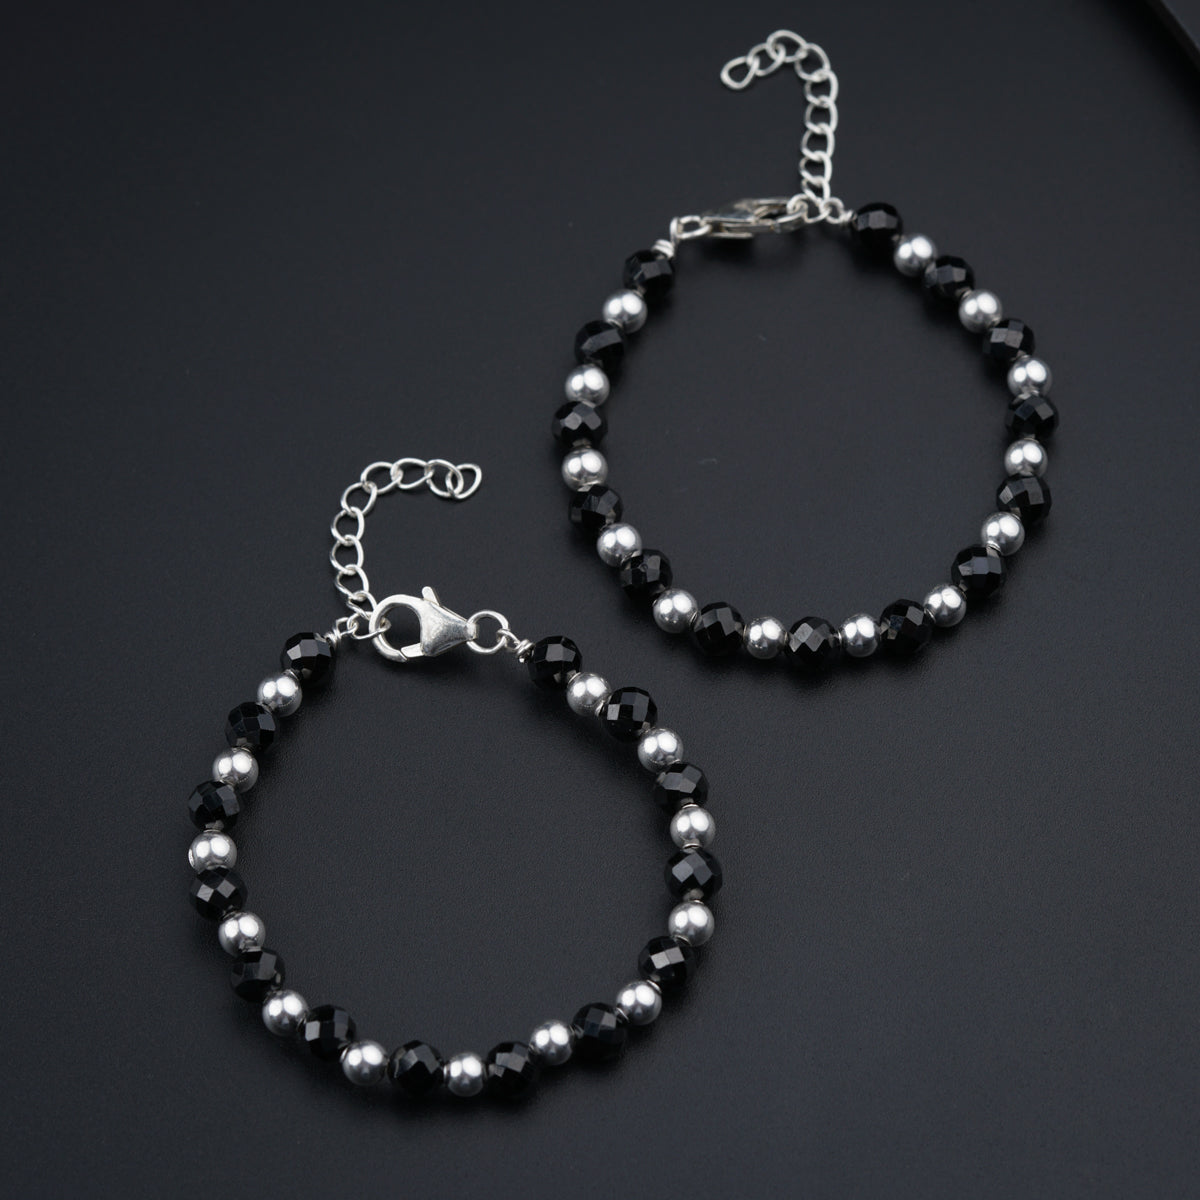 Baby Bracelet with Silver Beads and Black Spinal